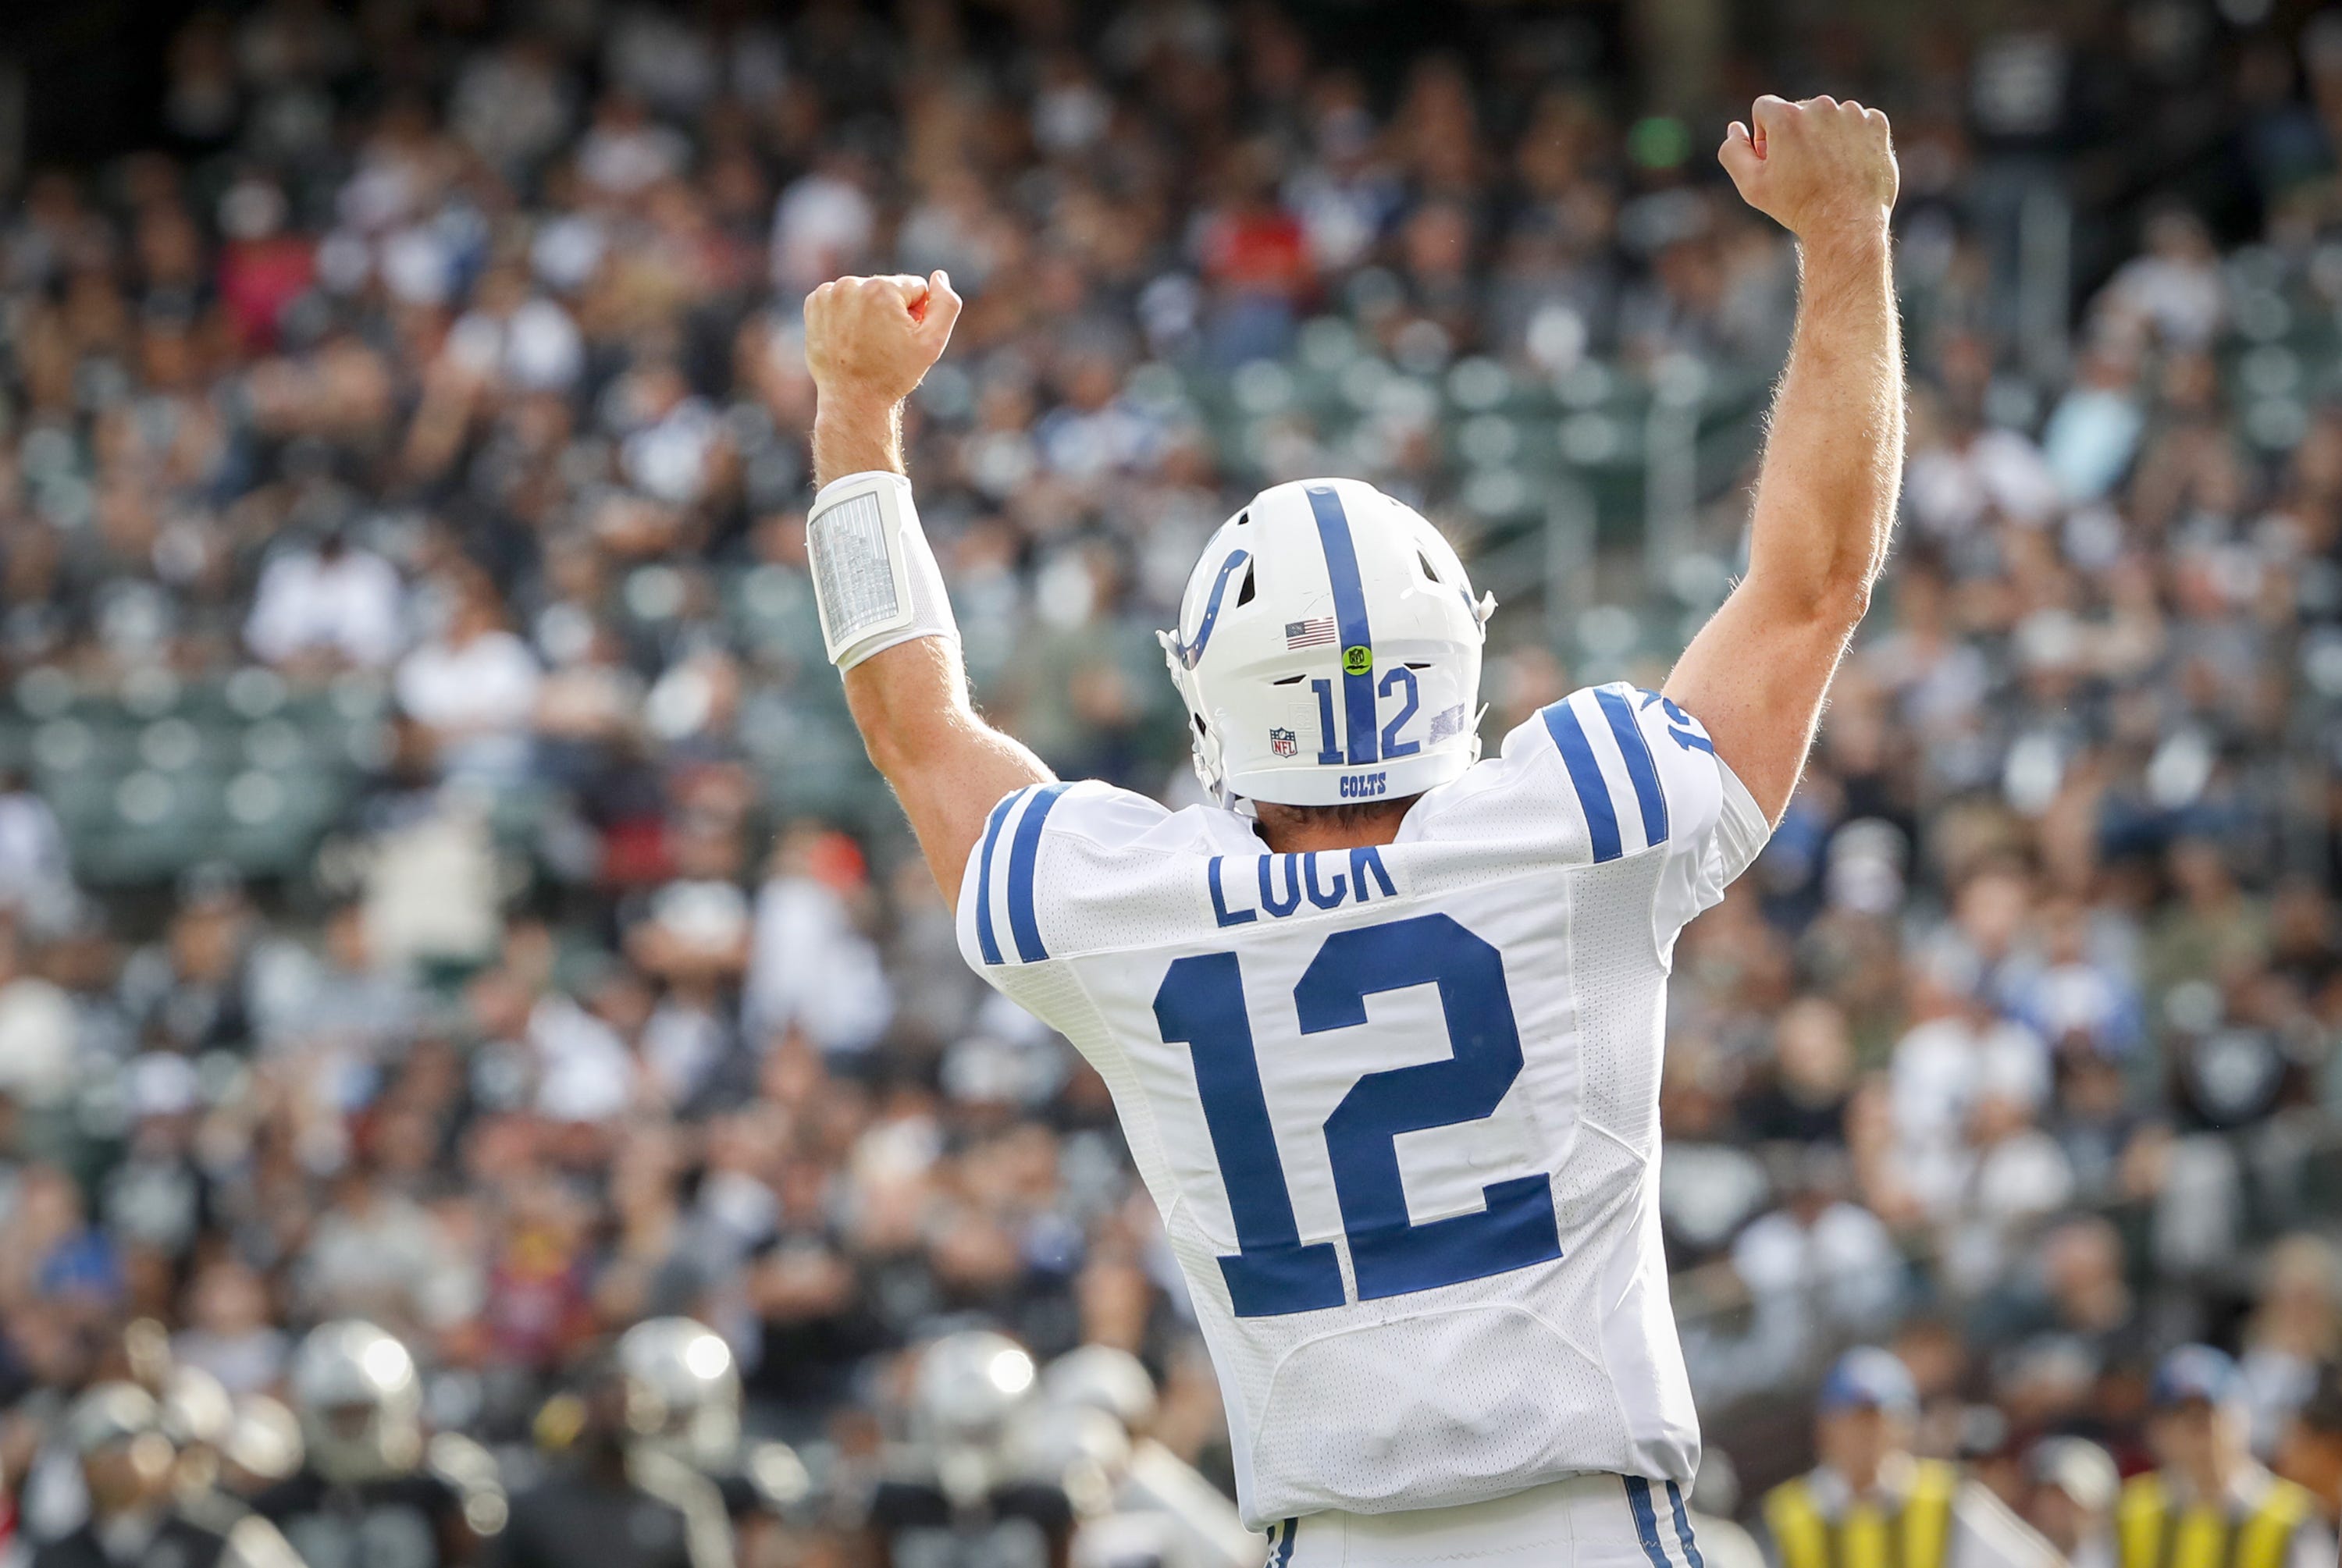 Captain Andrew Luck retires. Here are 